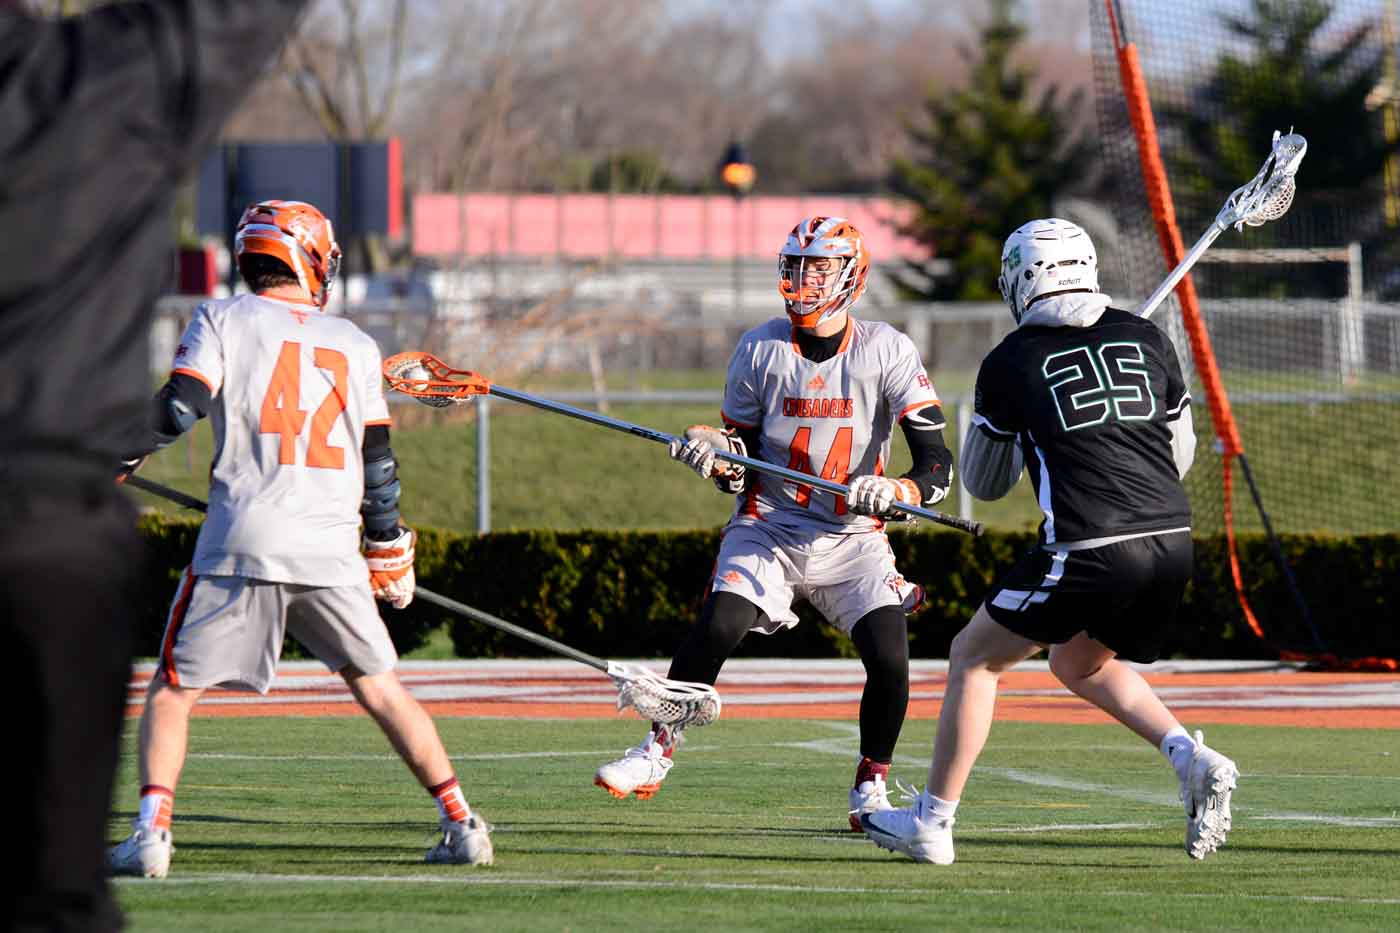 sport lacrosse play by Tom Killoran Photography